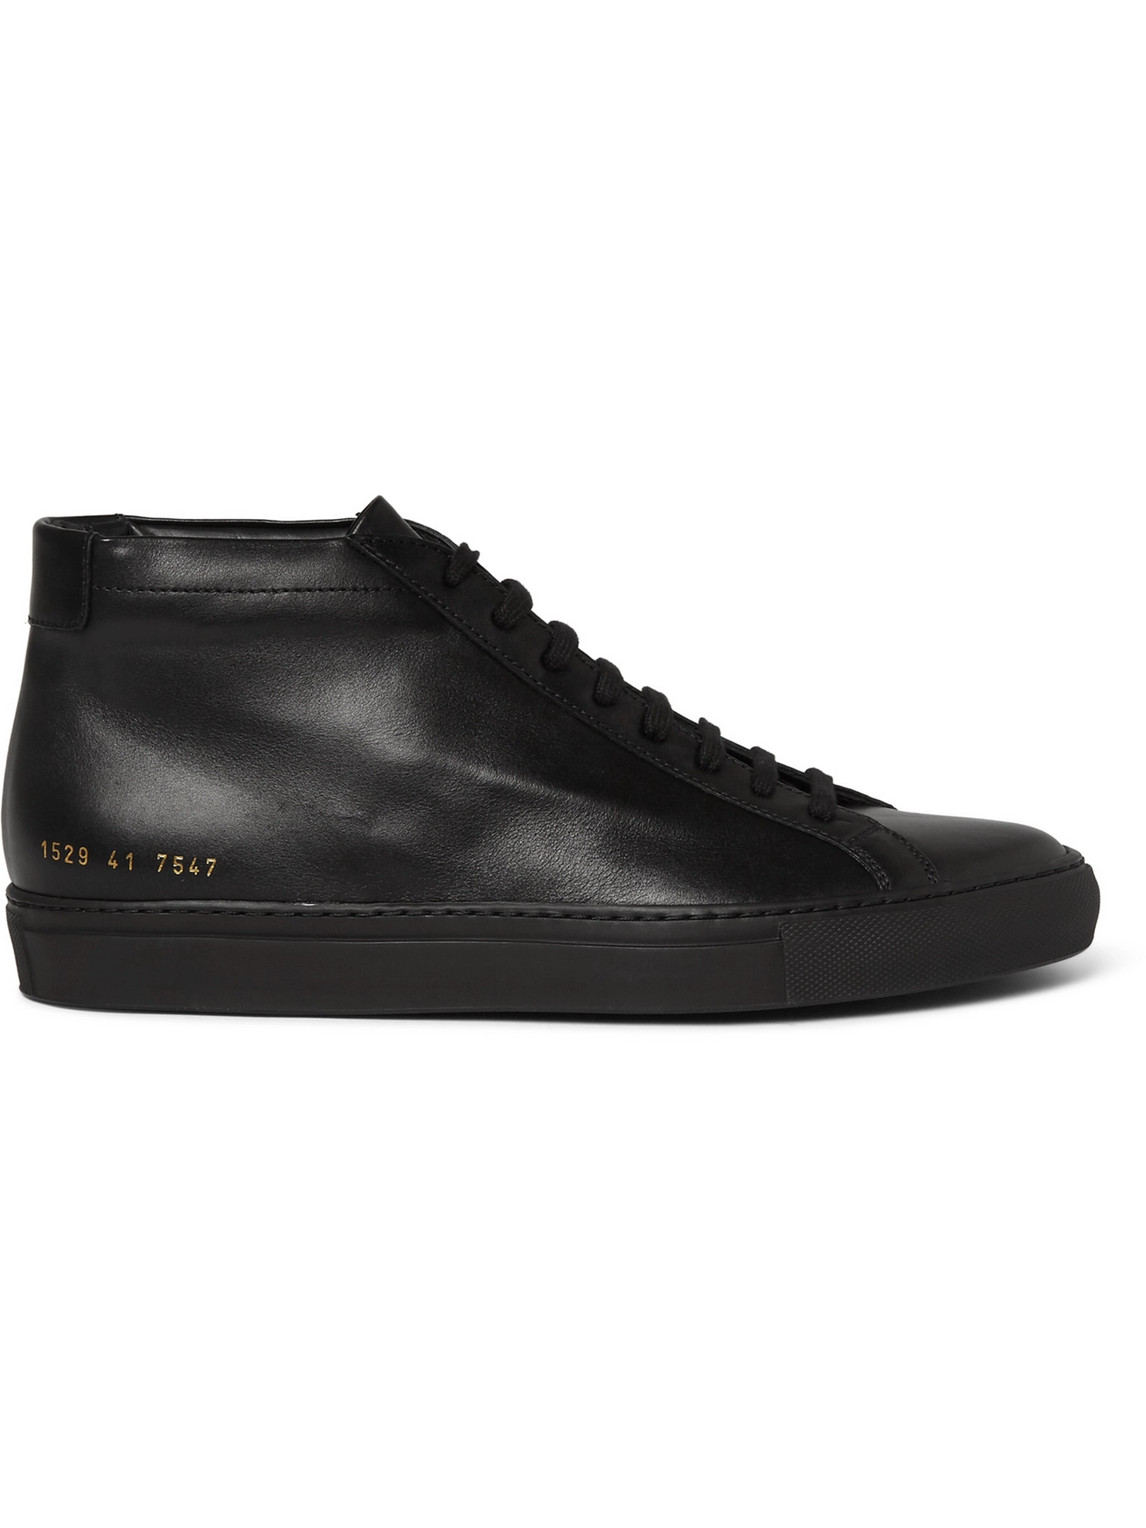 Shop Common Projects Original Achilles Leather High-top Sneakers In Black